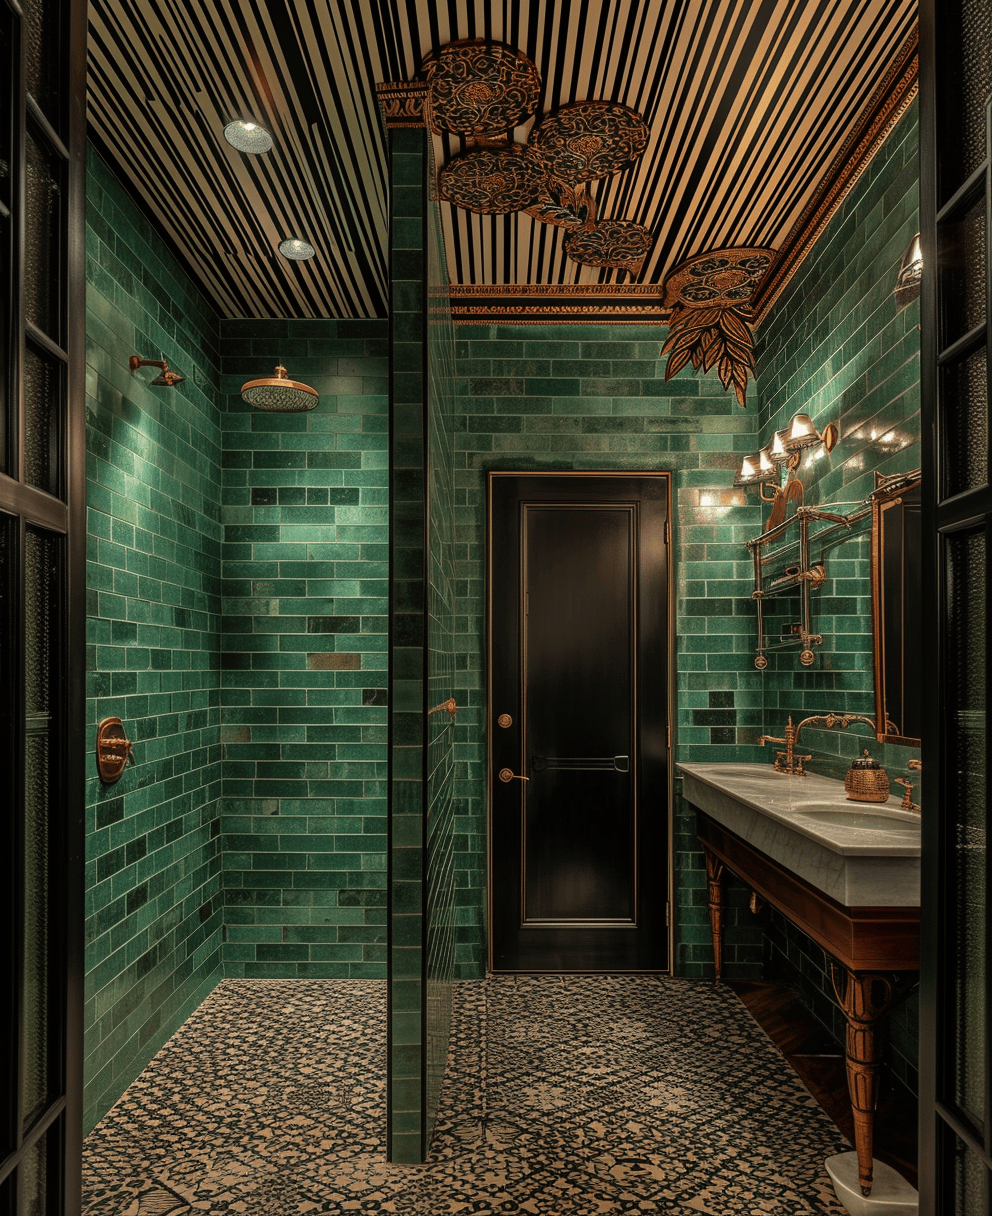 Art Deco bathroom design embodies vintage elegance with luxurious fixtures for a sophisticated look